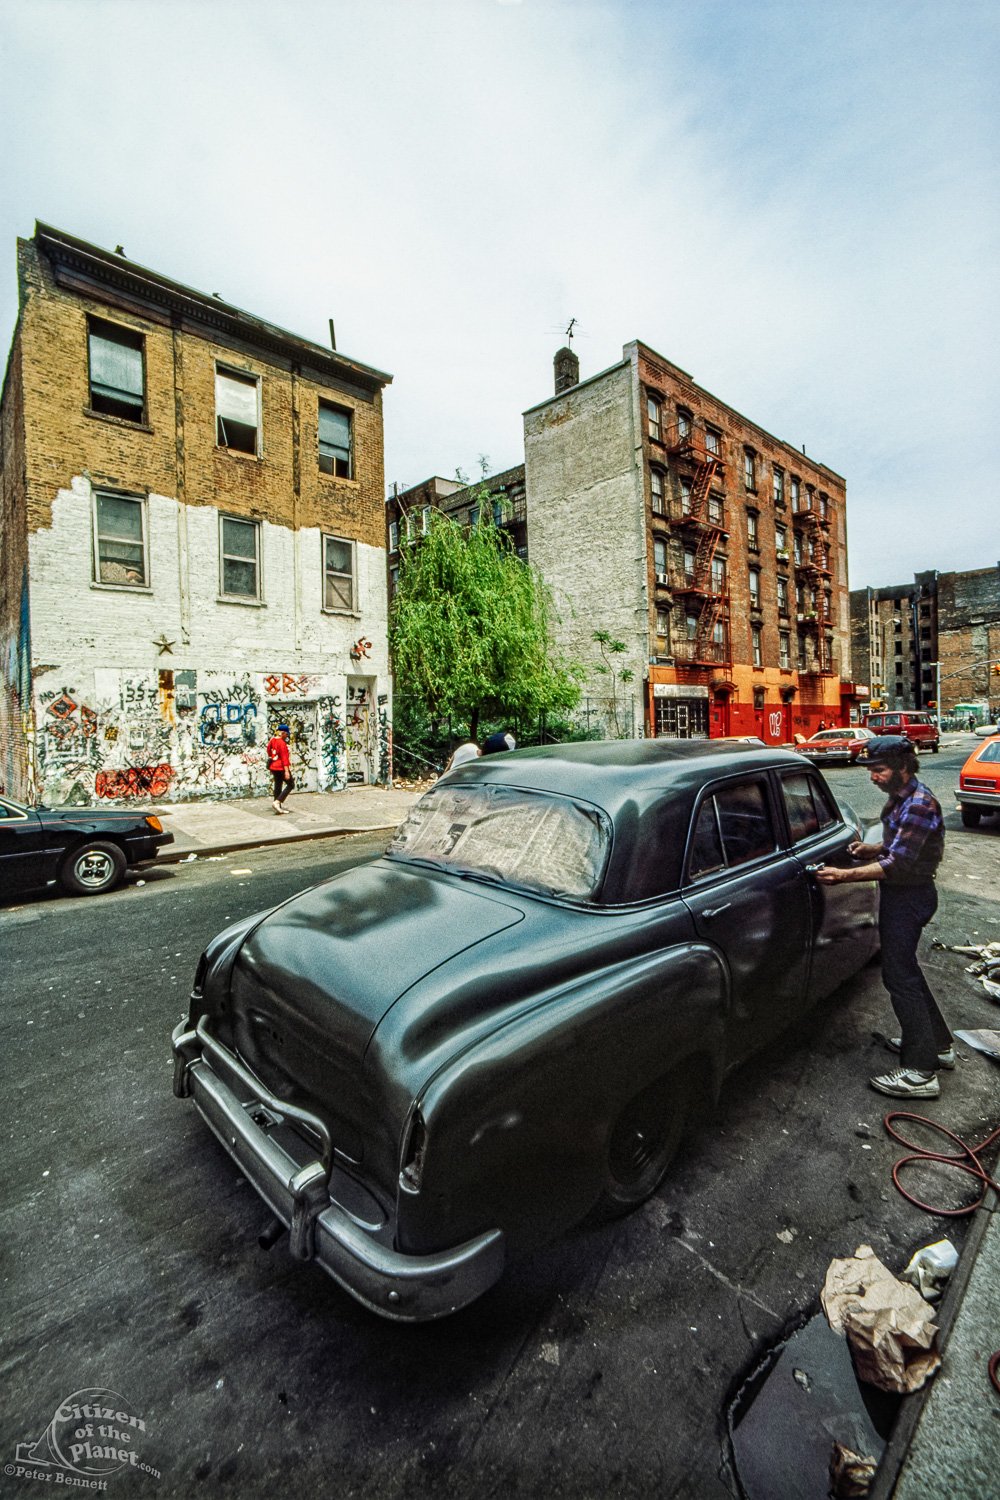  Working on a vintage car, East 8th Street, Club 8BC ion background, Alphabet City 